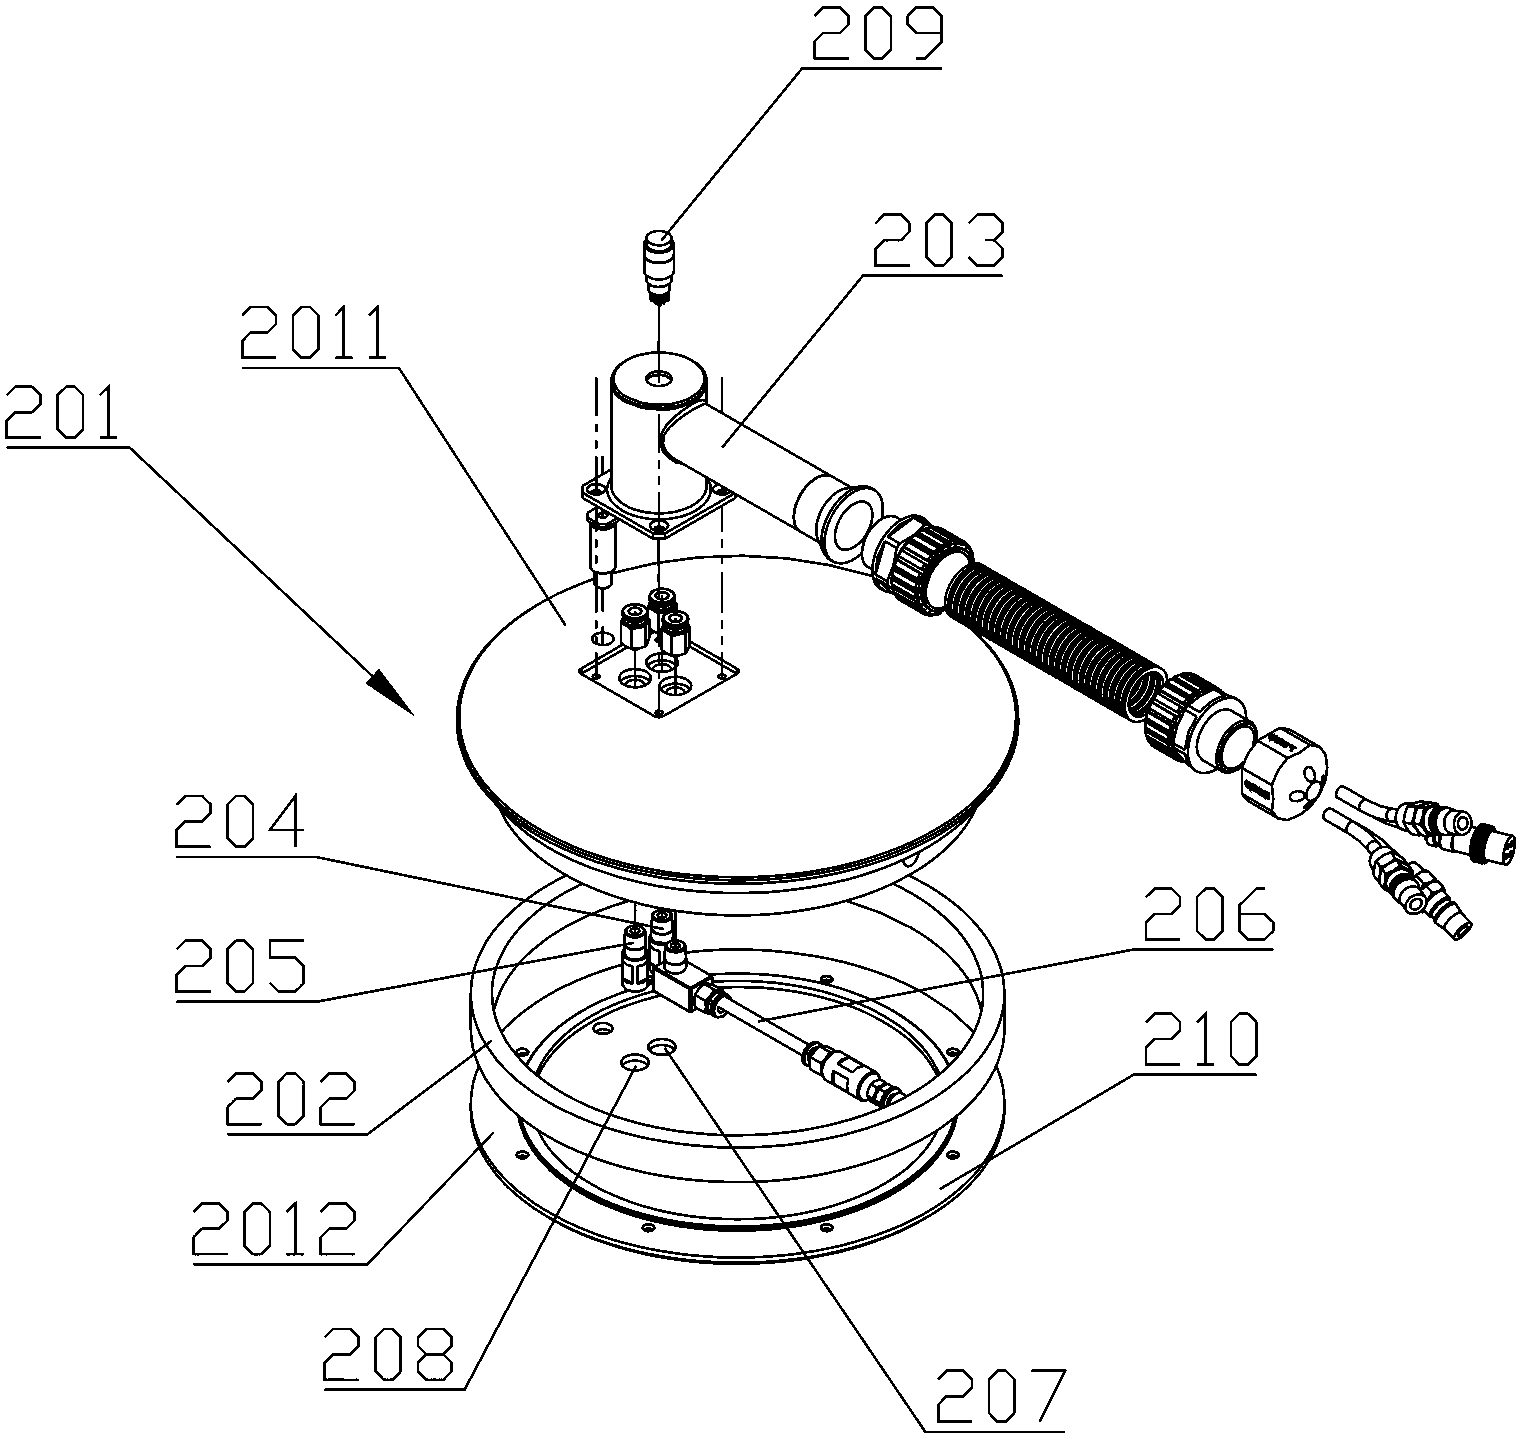 Apparatus capable of carrying out on-line detection on glove integrity in isolator system